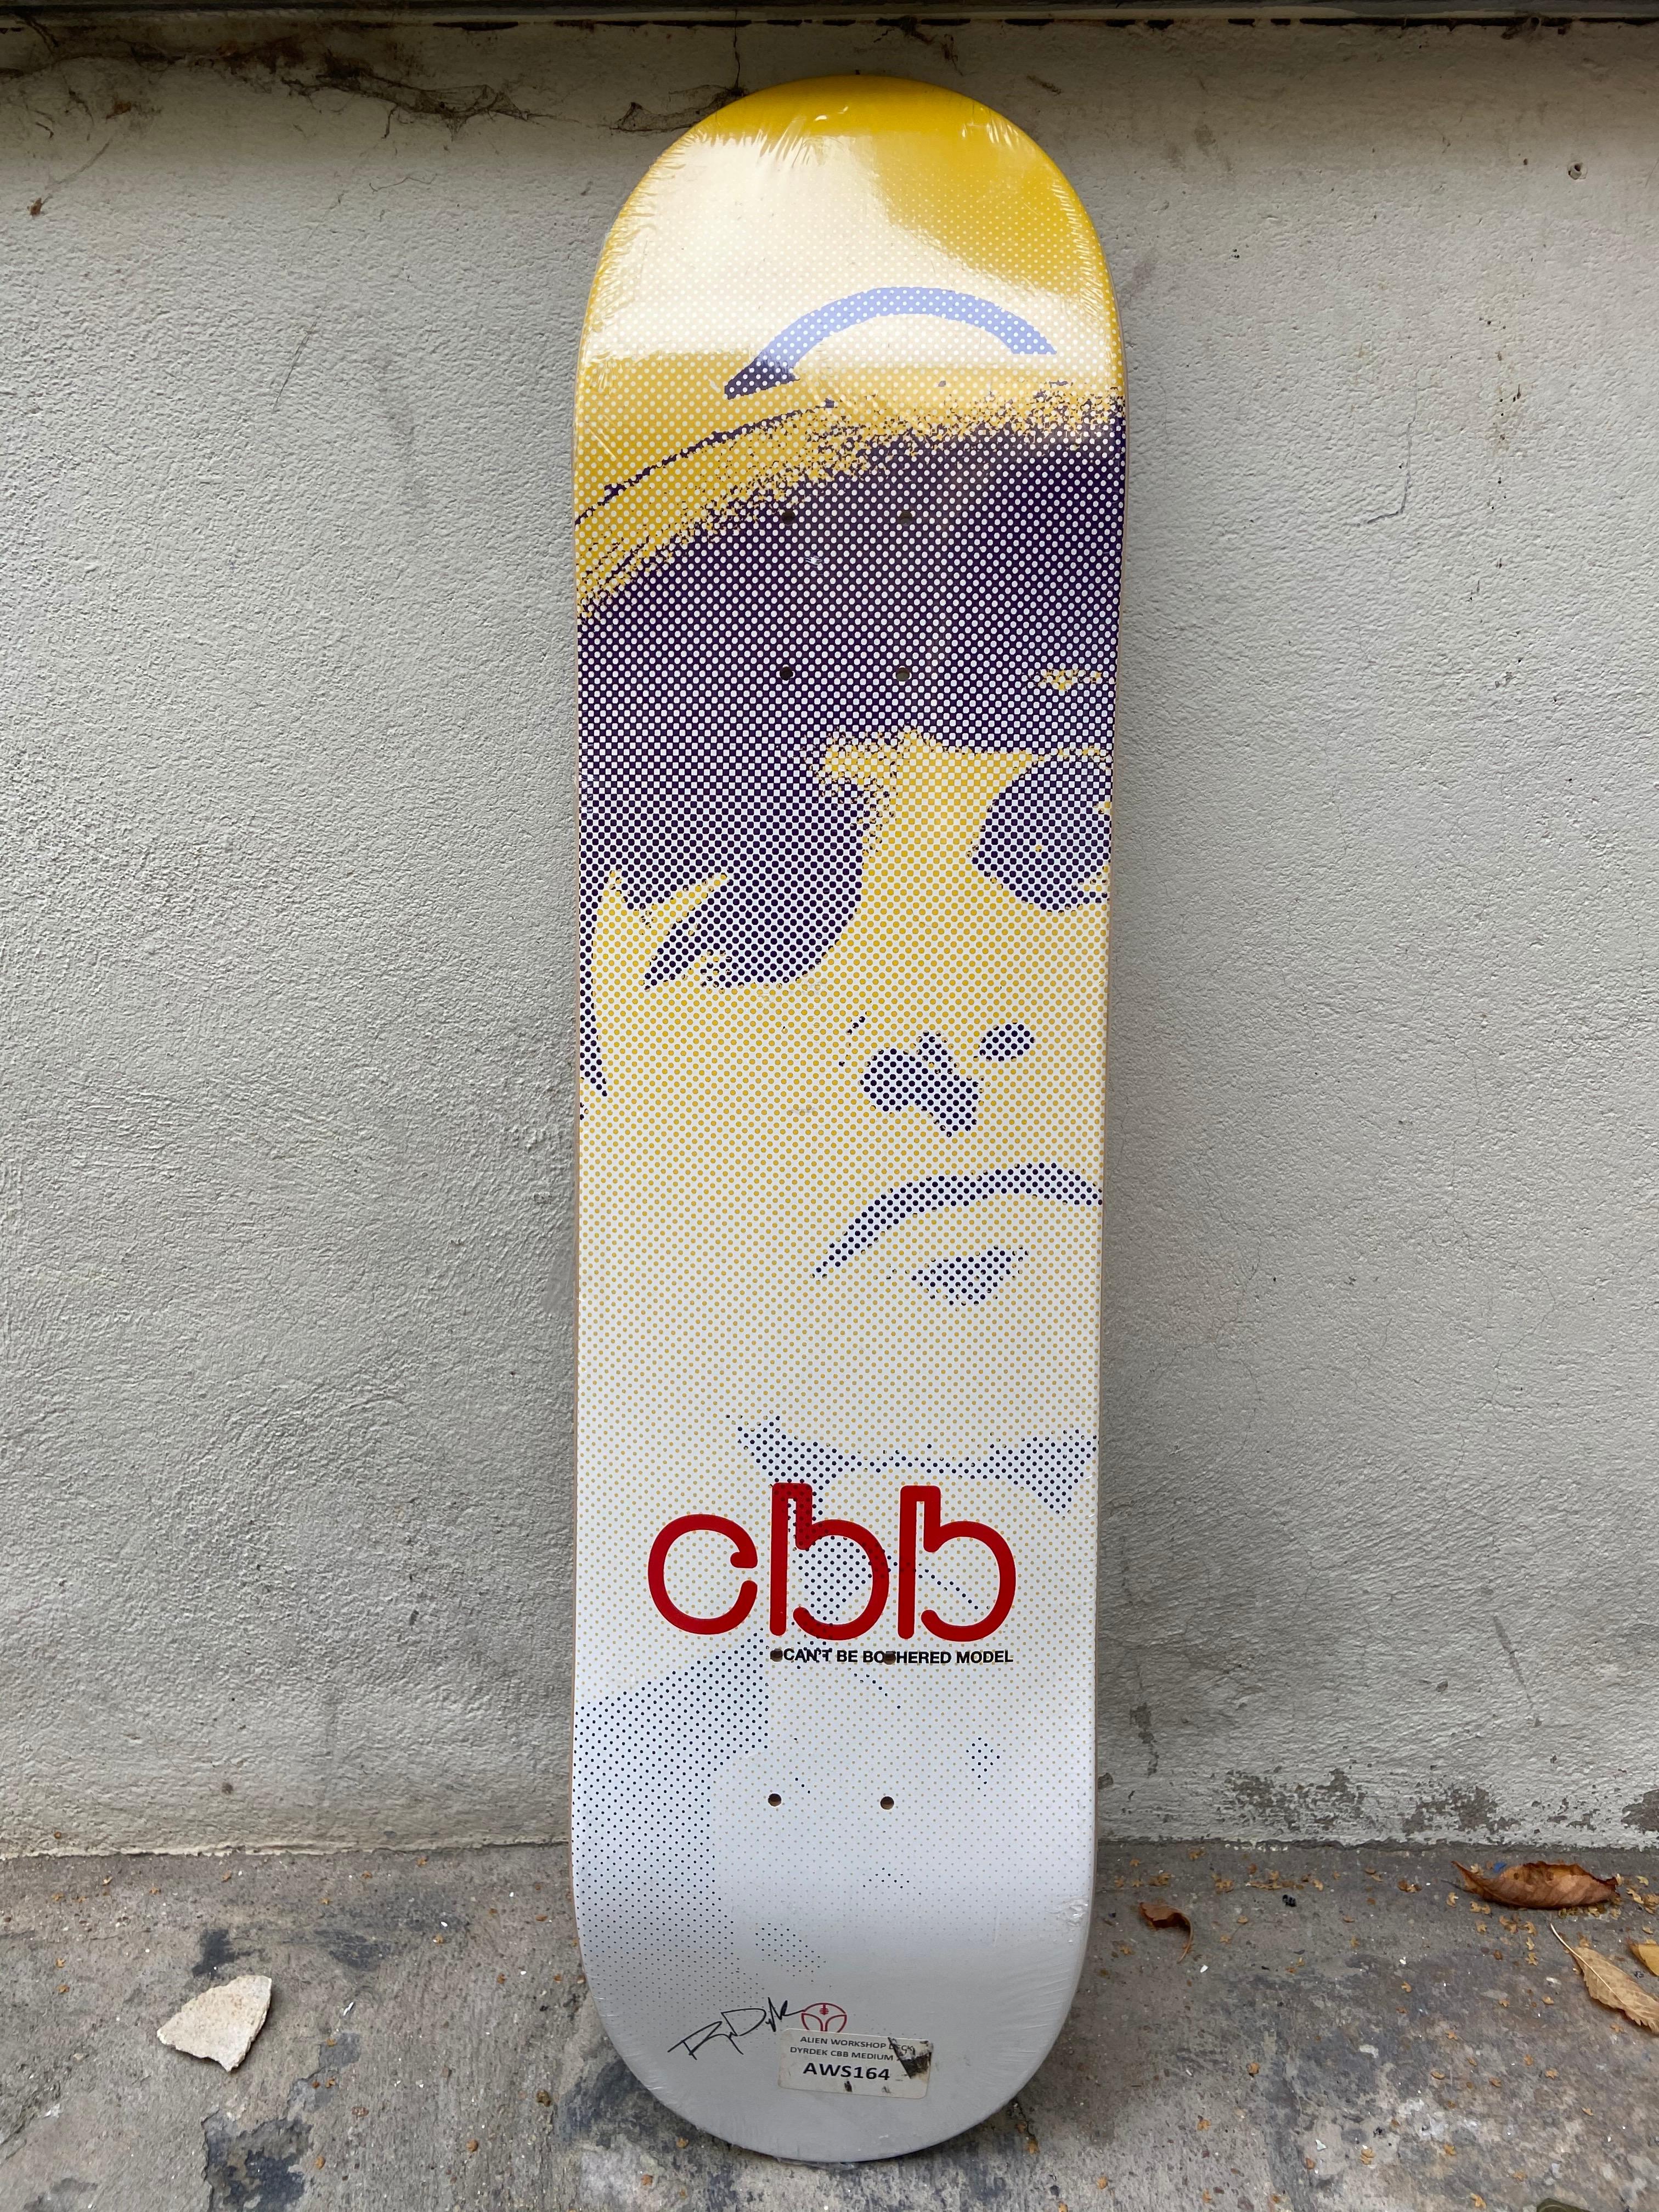 Dyrdek, Cant' Be Bothered Model Skate Board Collector In New Condition For Sale In Saint Ouen, FR